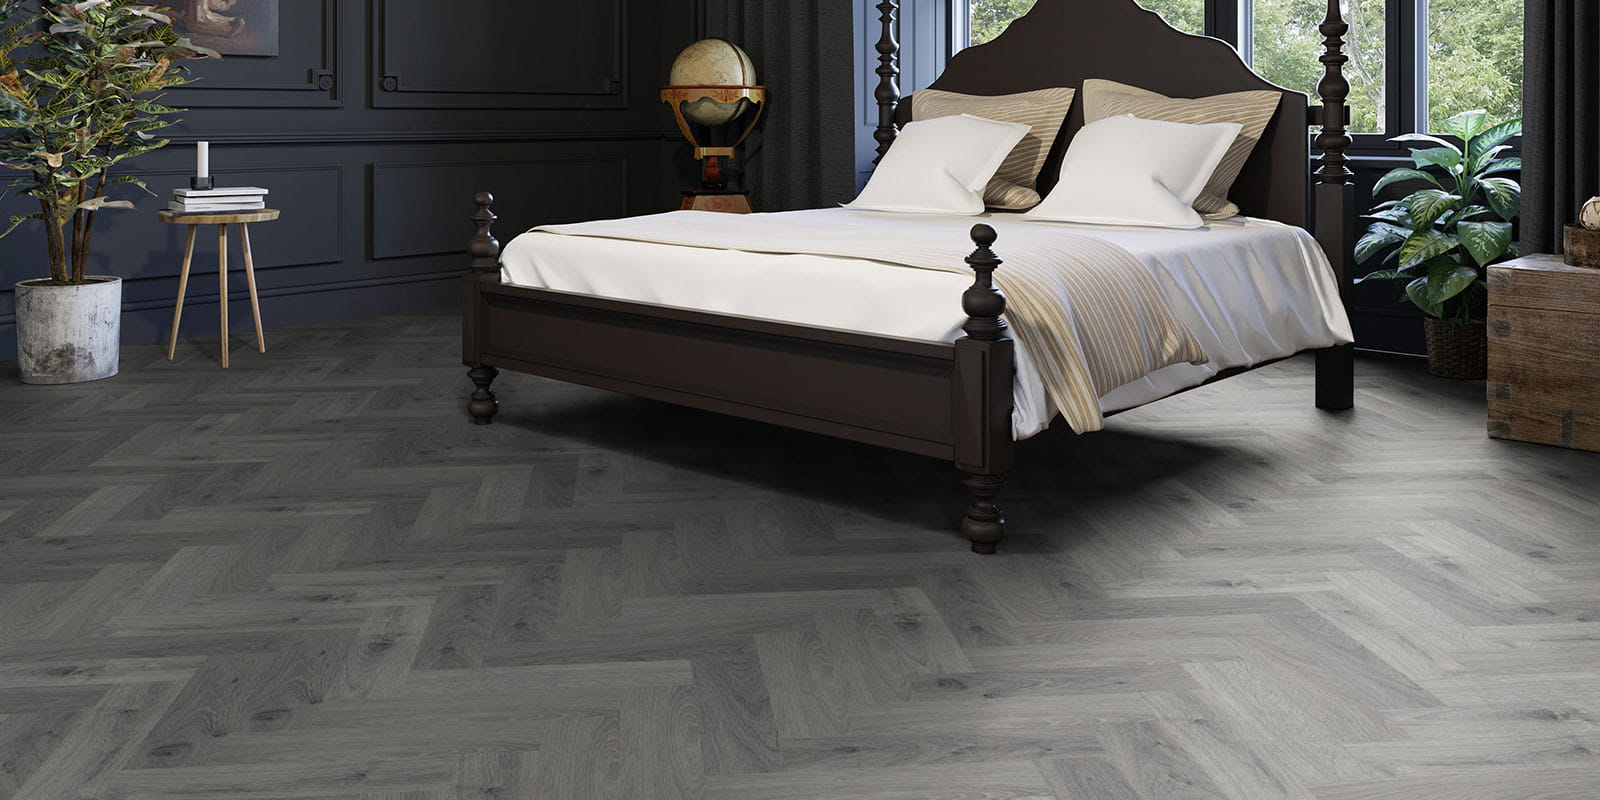 Invictus® sol vinyle de luxe - Highland Oak - Frosted - Bed